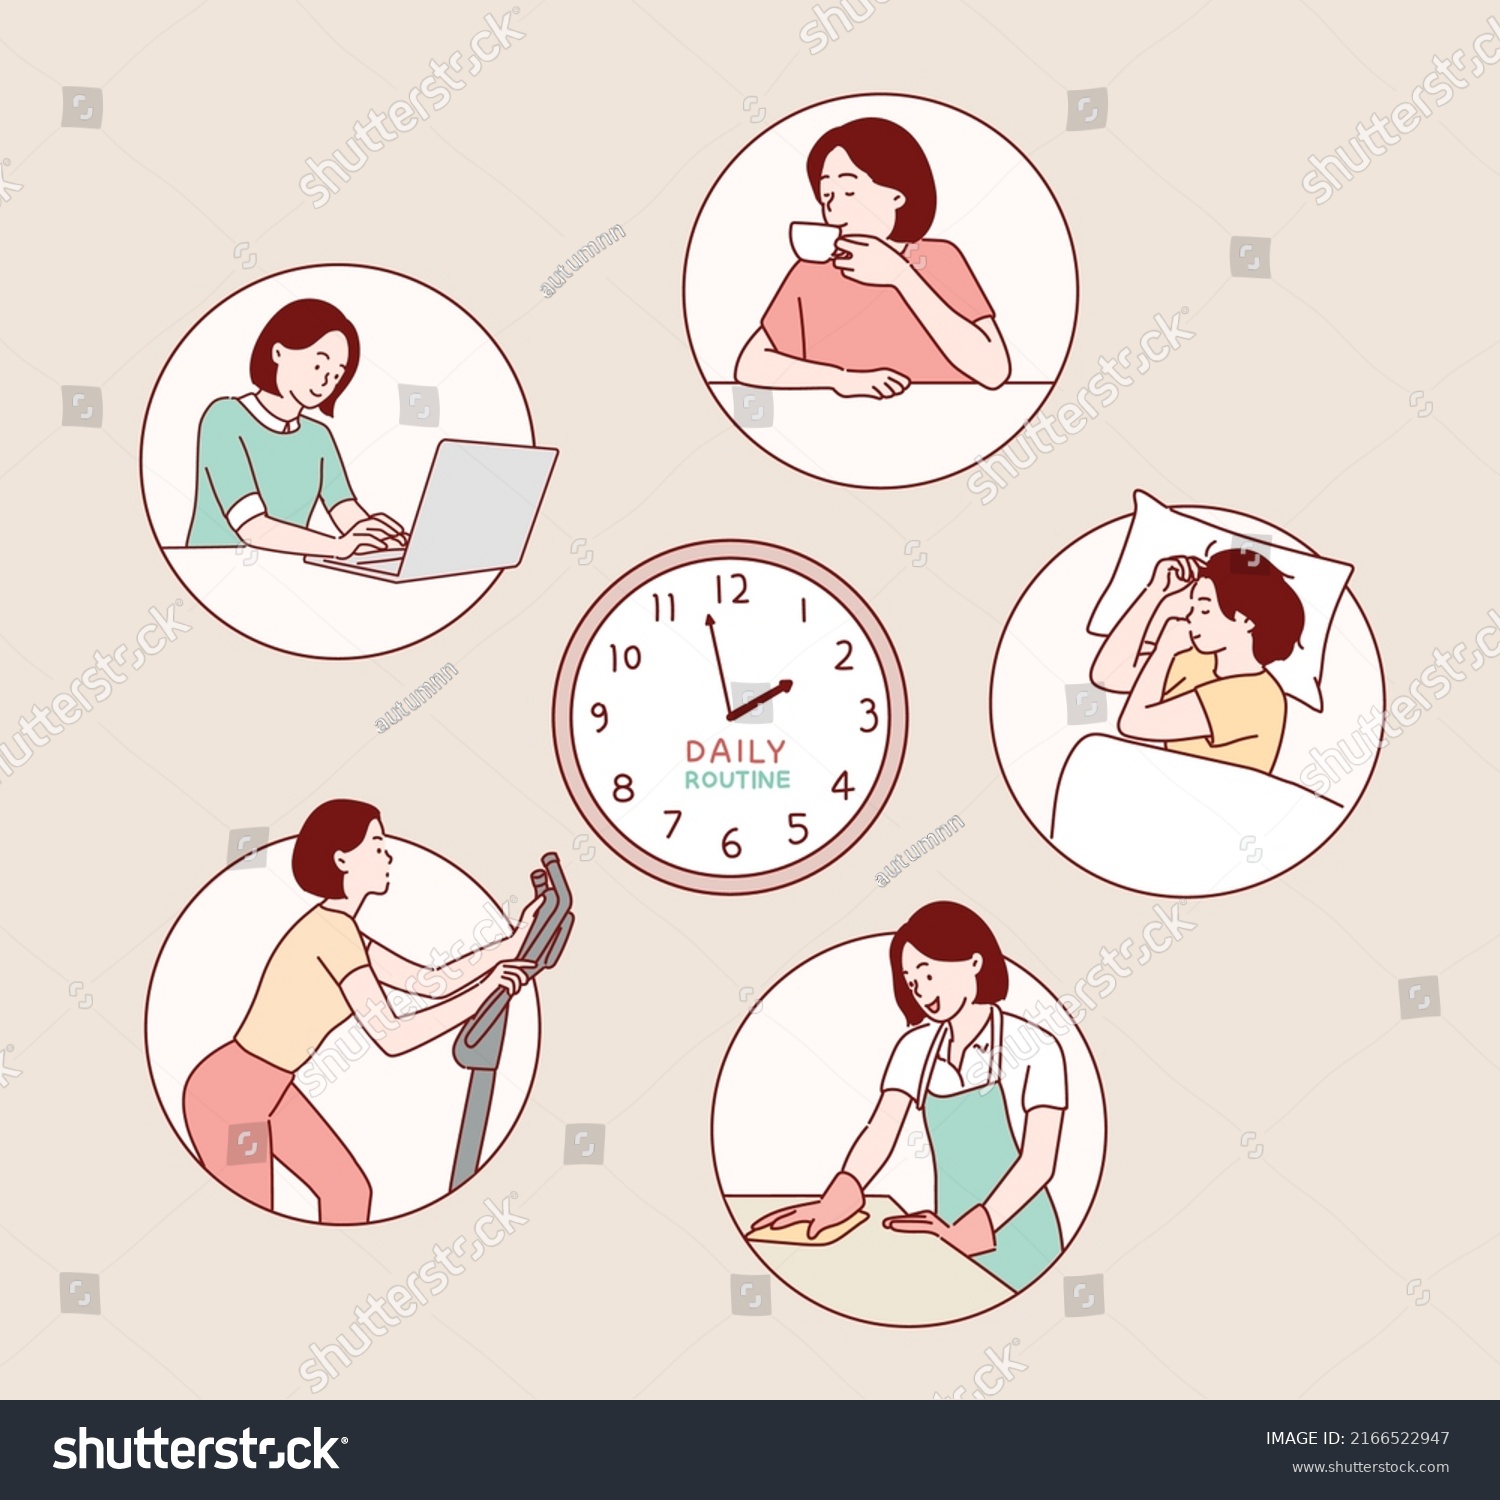 Female routine. Lifestyle activities temporal distribution, young woman daily schedule, life scenes around big clock face. Hand drawn style vector design illustrations. #2166522947